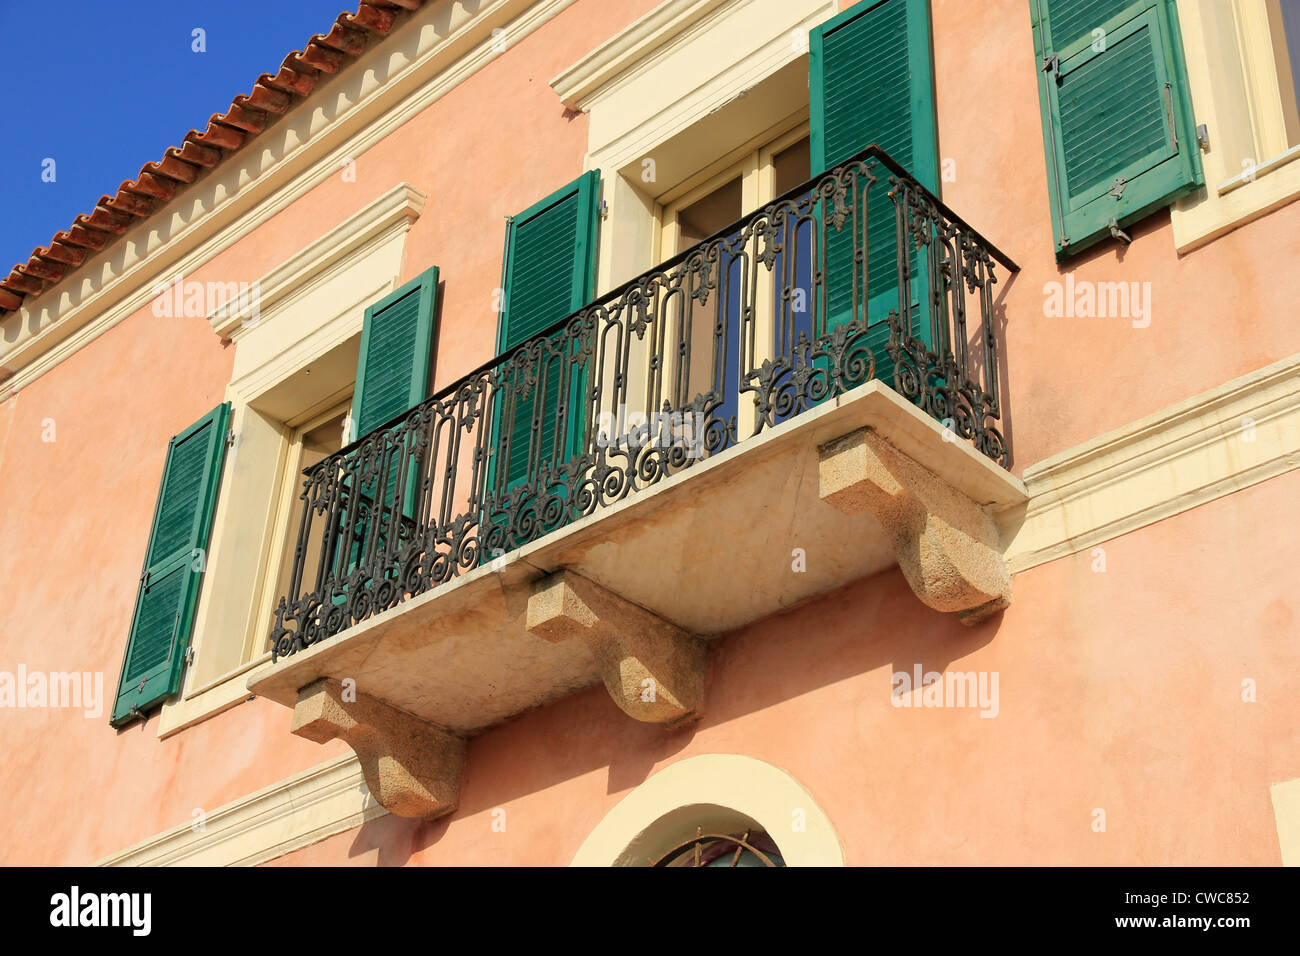 traditional architecture of Sardinian civic building in Piazza Fressi, Palau, north east Sardinia, Italy Stock Photo